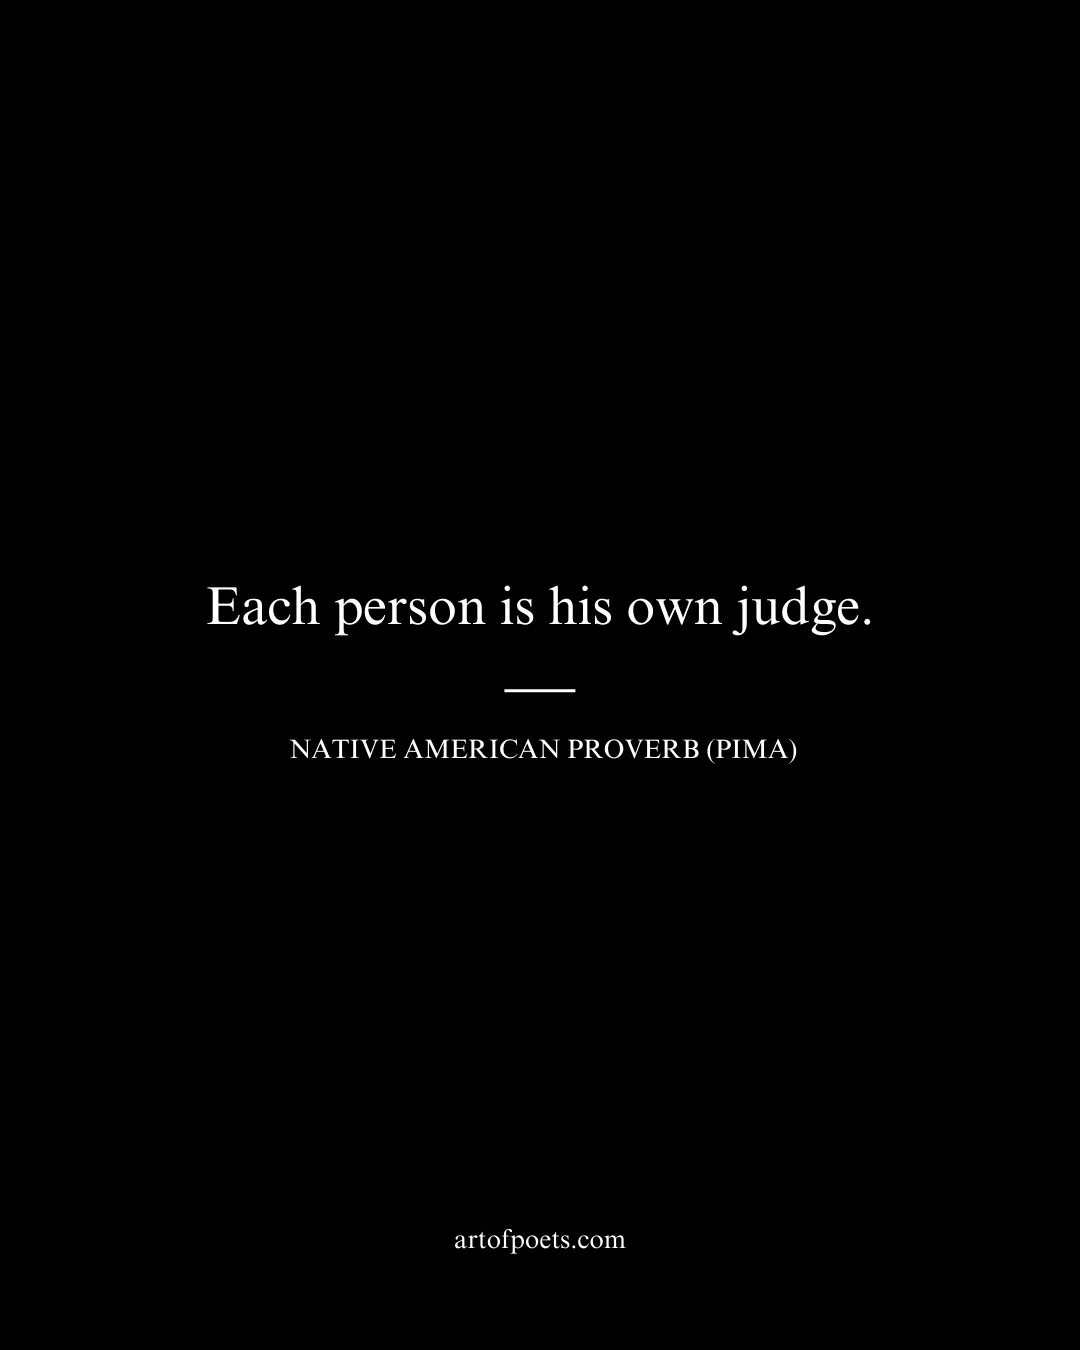 Each person is his own judge